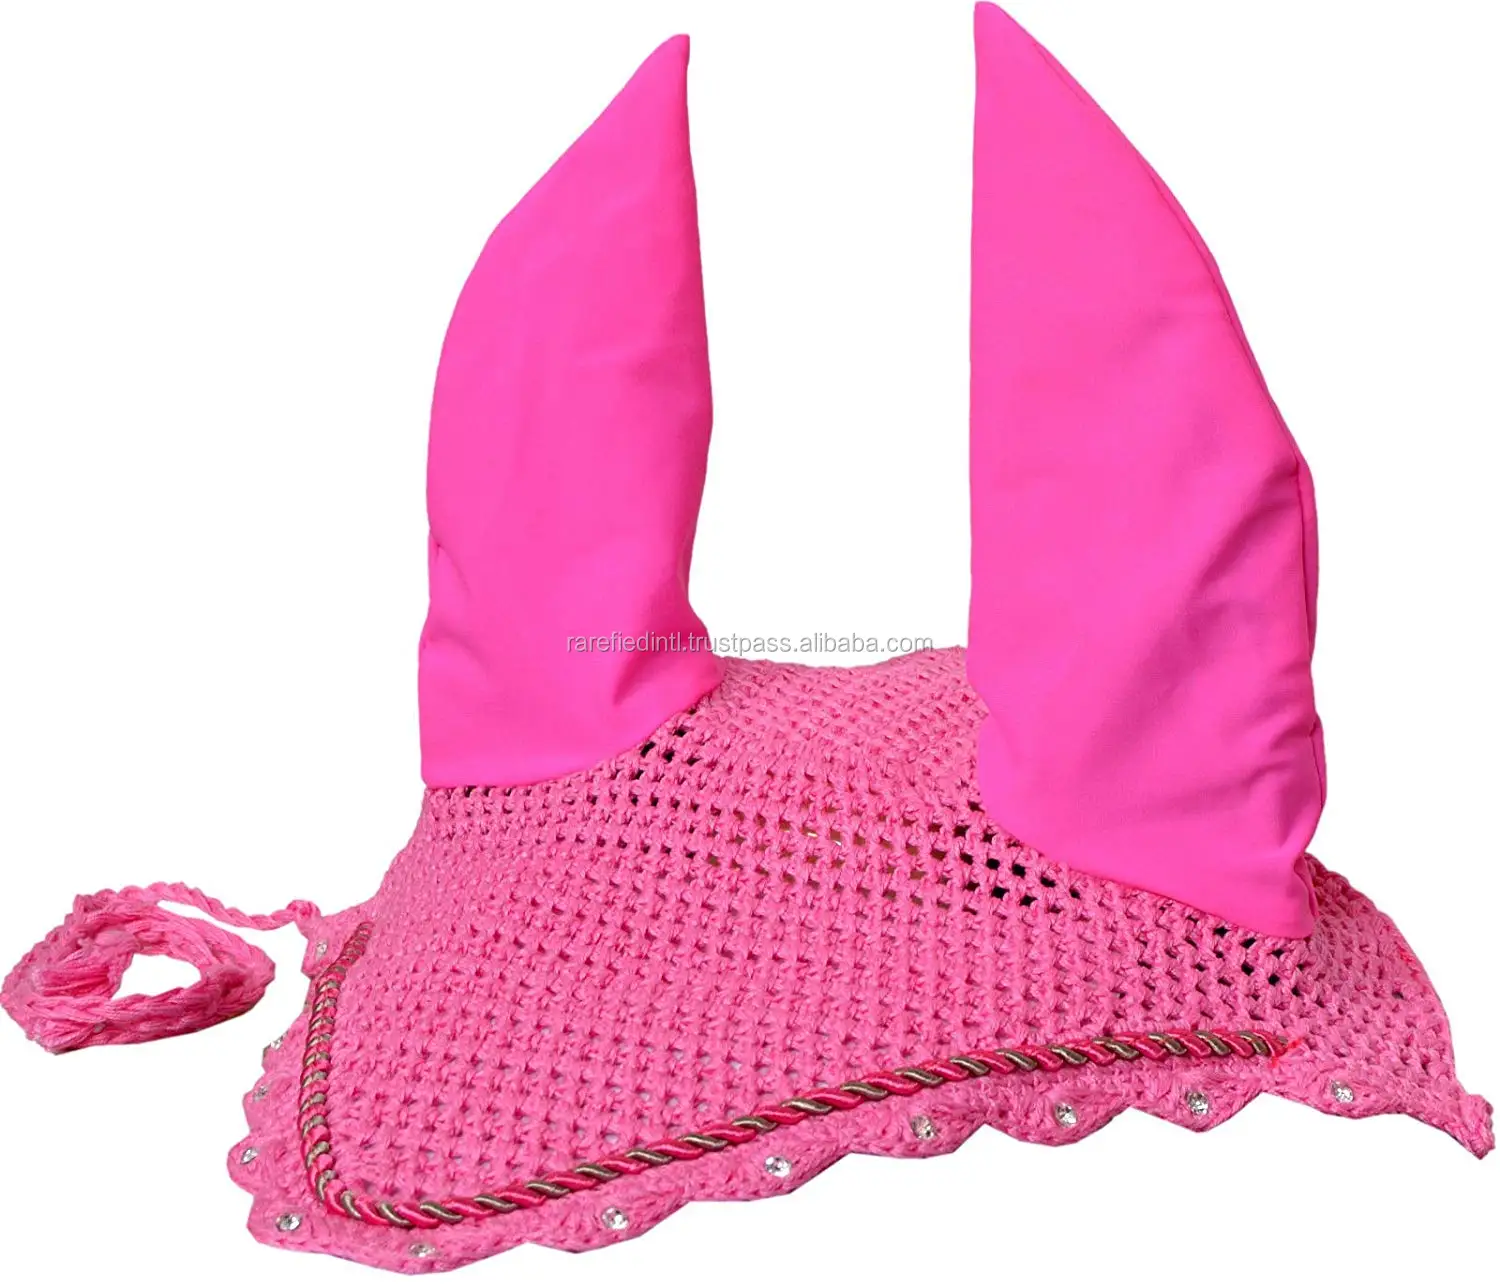 COB PONY FULL EAR NET CROCHET FLY VEIL EQUESTRIAN HORSE WITH CRYSTALS PINK 